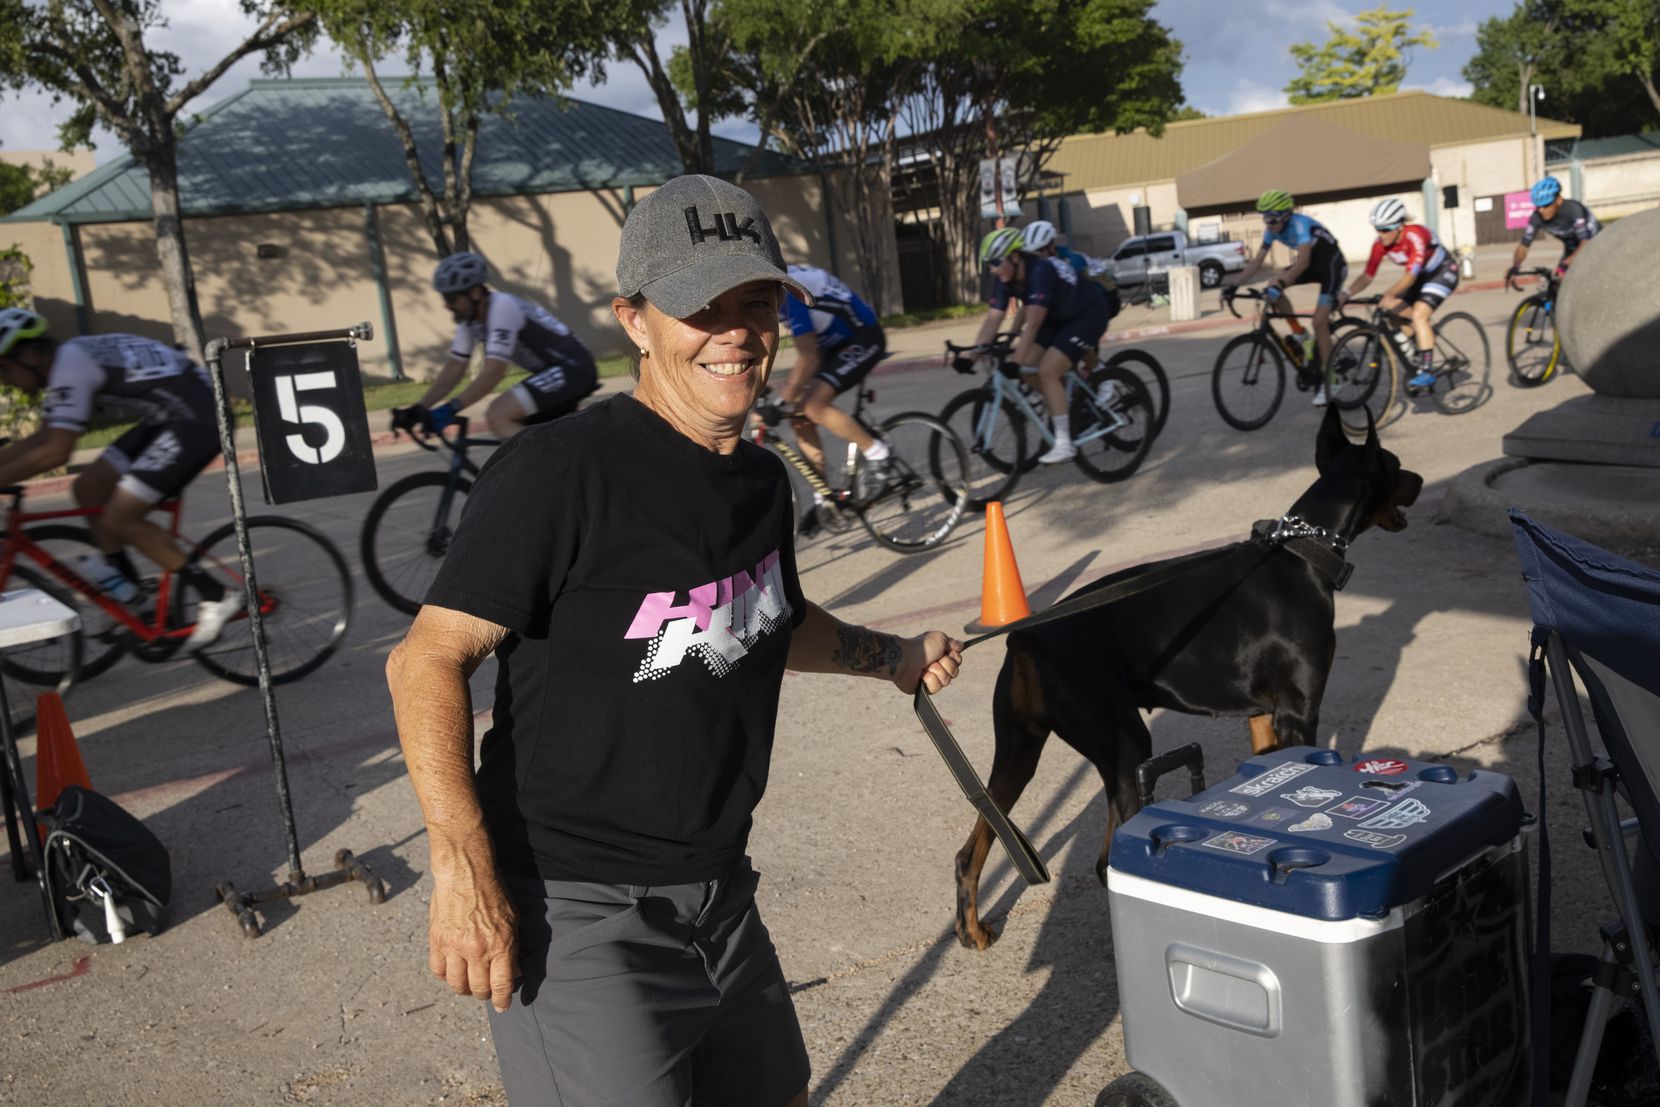 Ginny King founder of King Racing Group walks around as cyclists compete at Fair Park on Thursday, May 20, 2021, in Dallas. 